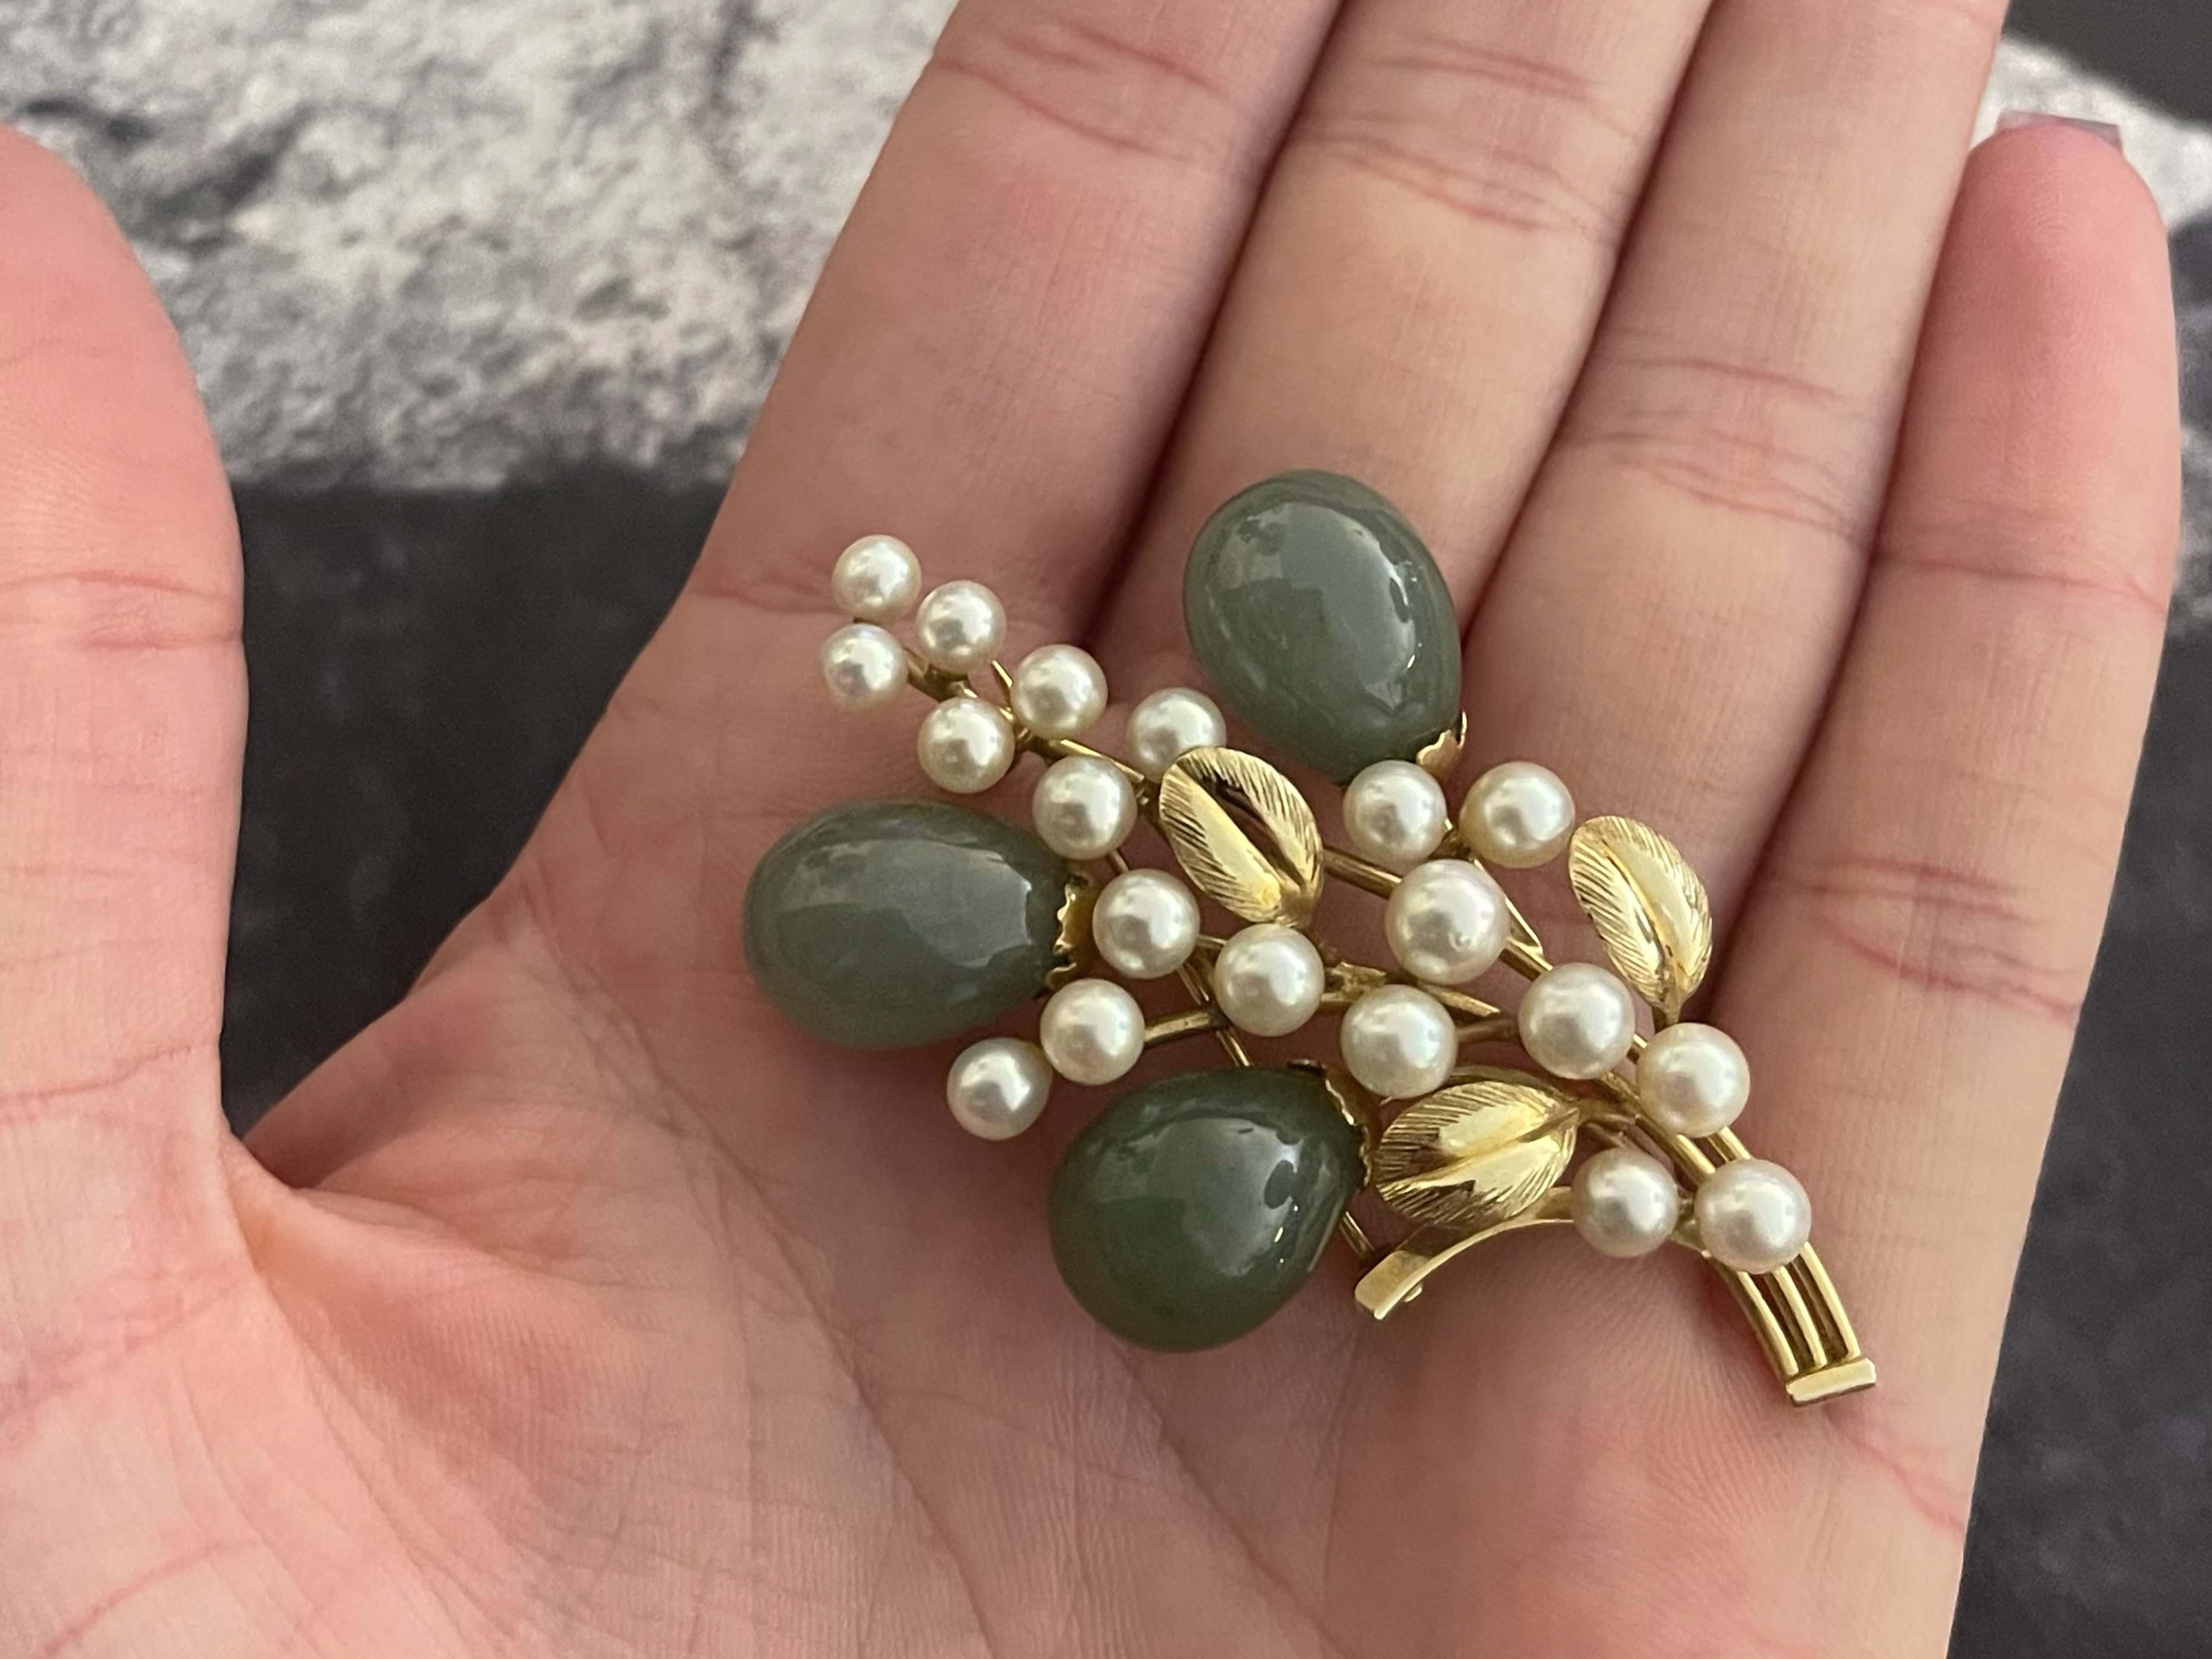 Brooch Specifications:

Designer: Ming's

Metal: 14k Yellow Gold

Total Weight: 18.6 Grams

Stones: Jade and akoya pearls

Brooch Measurements: 2.25